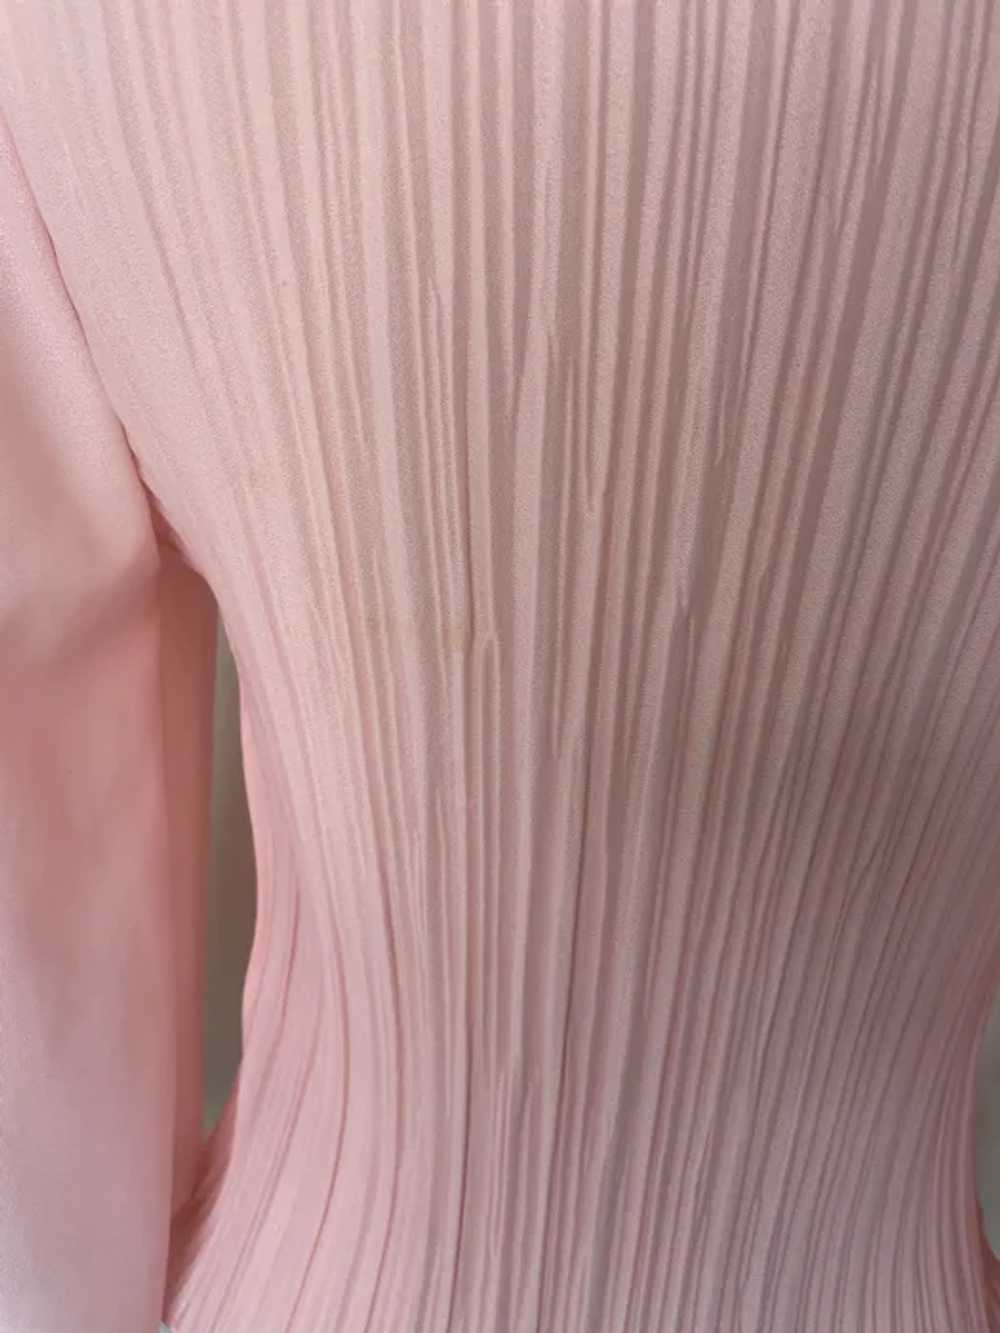 Vintage 1970s Pink Pleated High Collar Blouse - image 5